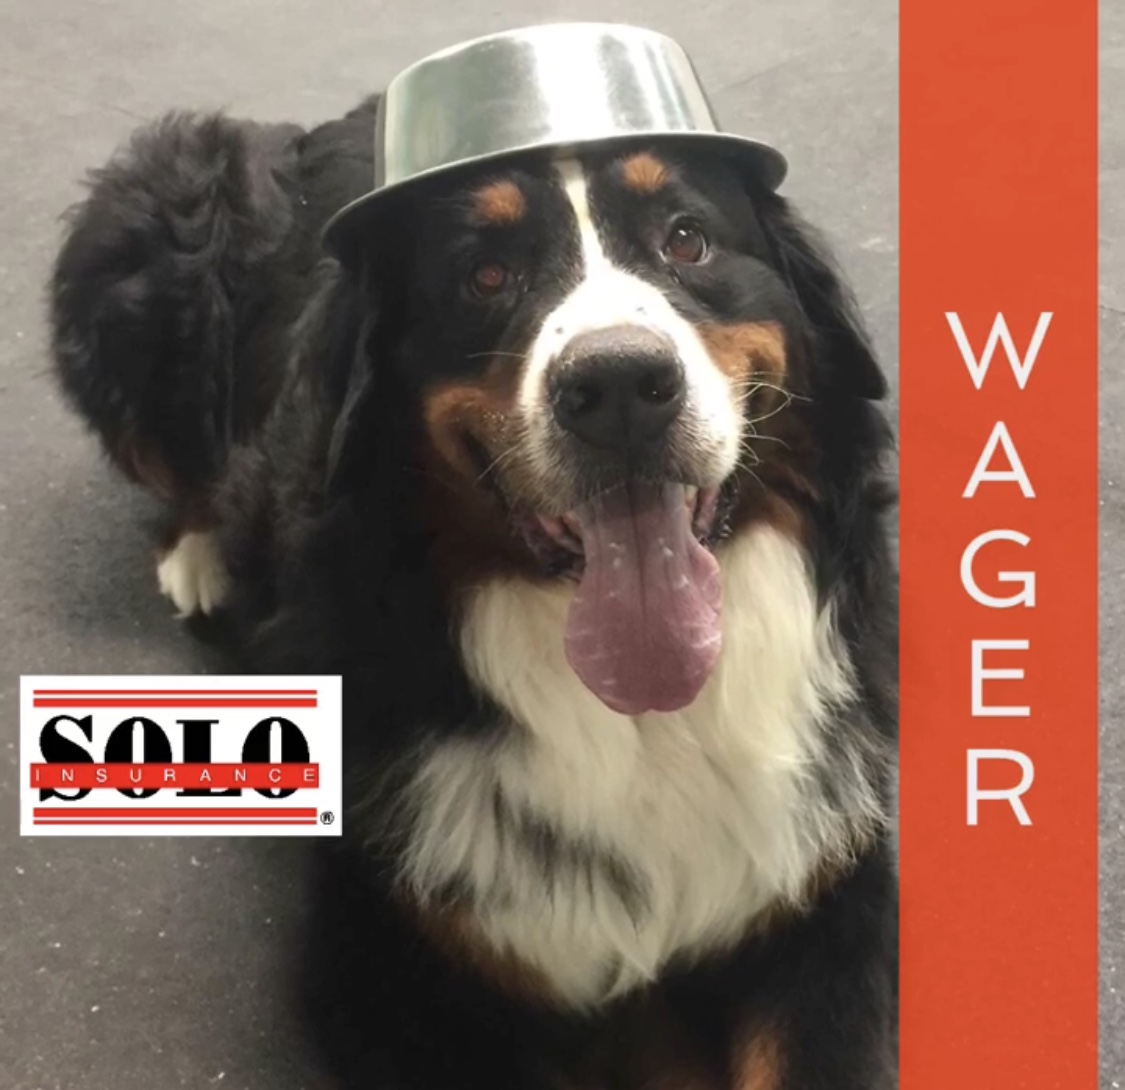 Bernese Mountain Dog wearing his dinner bowl as a hat